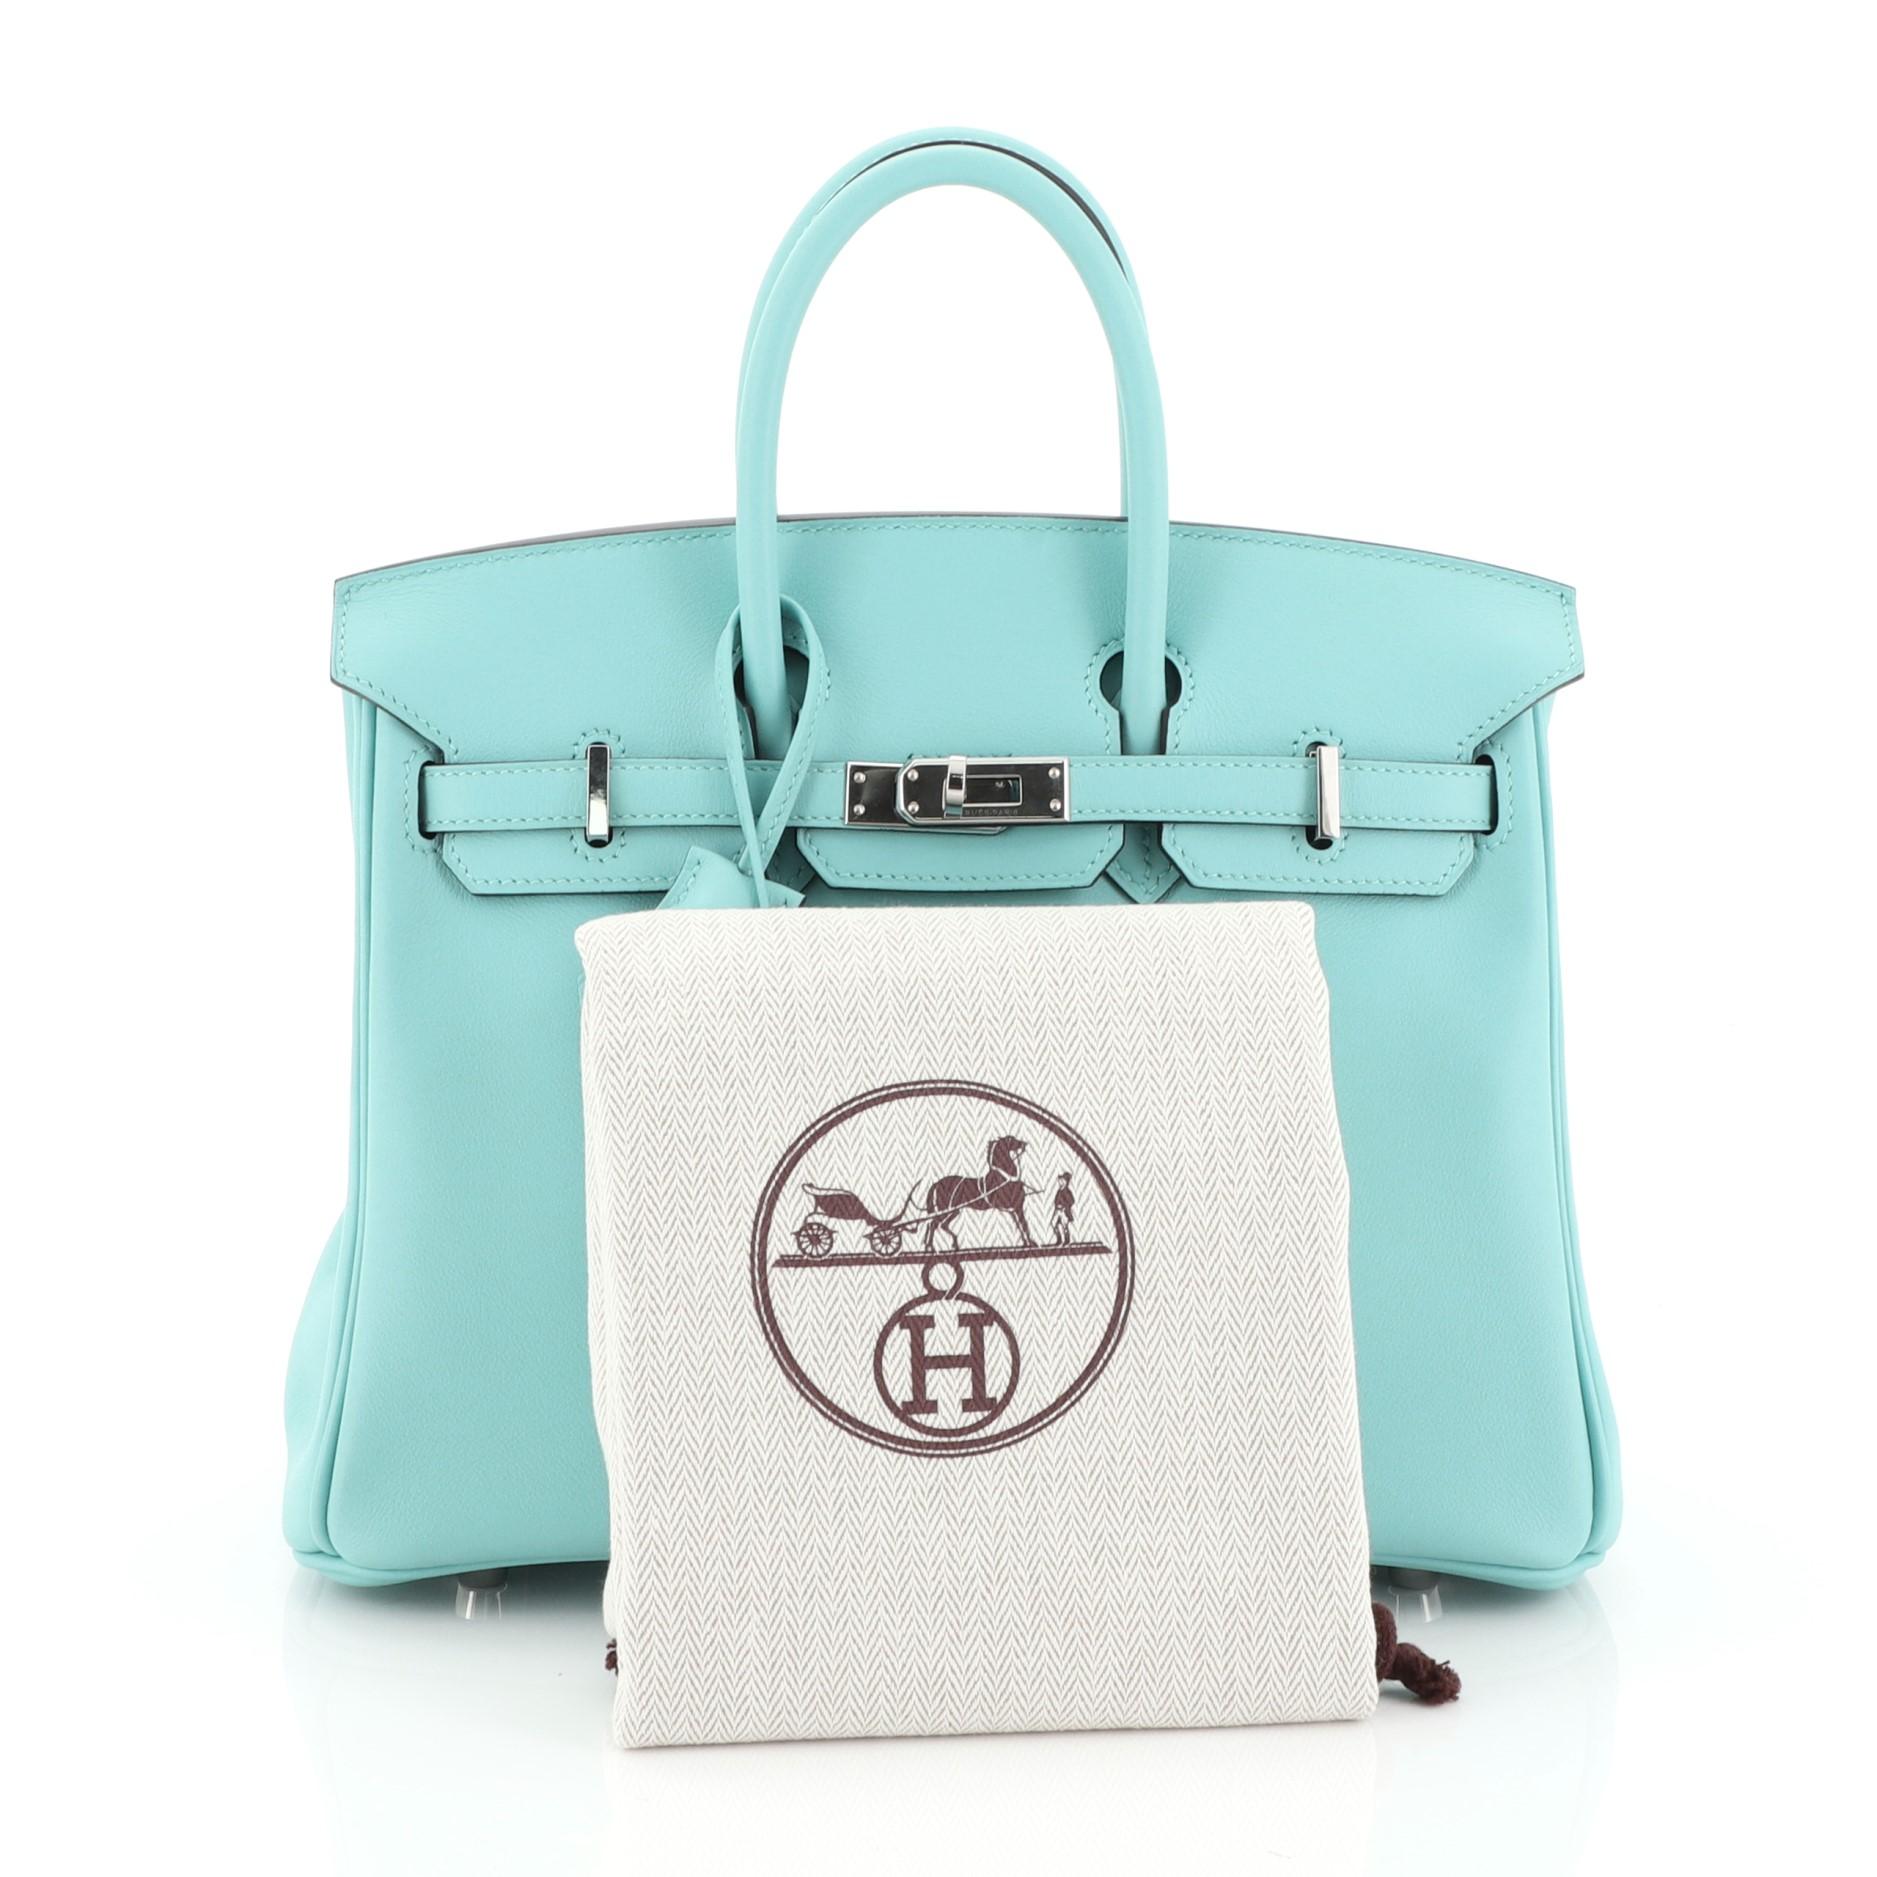 This Hermes Birkin Handbag Bleu Atoll Swift with Palladium Hardware 25, crafted in Bleu Atoll blue Swift leather, features dual rolled handles, frontal flap, and palladium hardware. Its turn-lock closure opens to a Bleu Atoll blue Swift leather